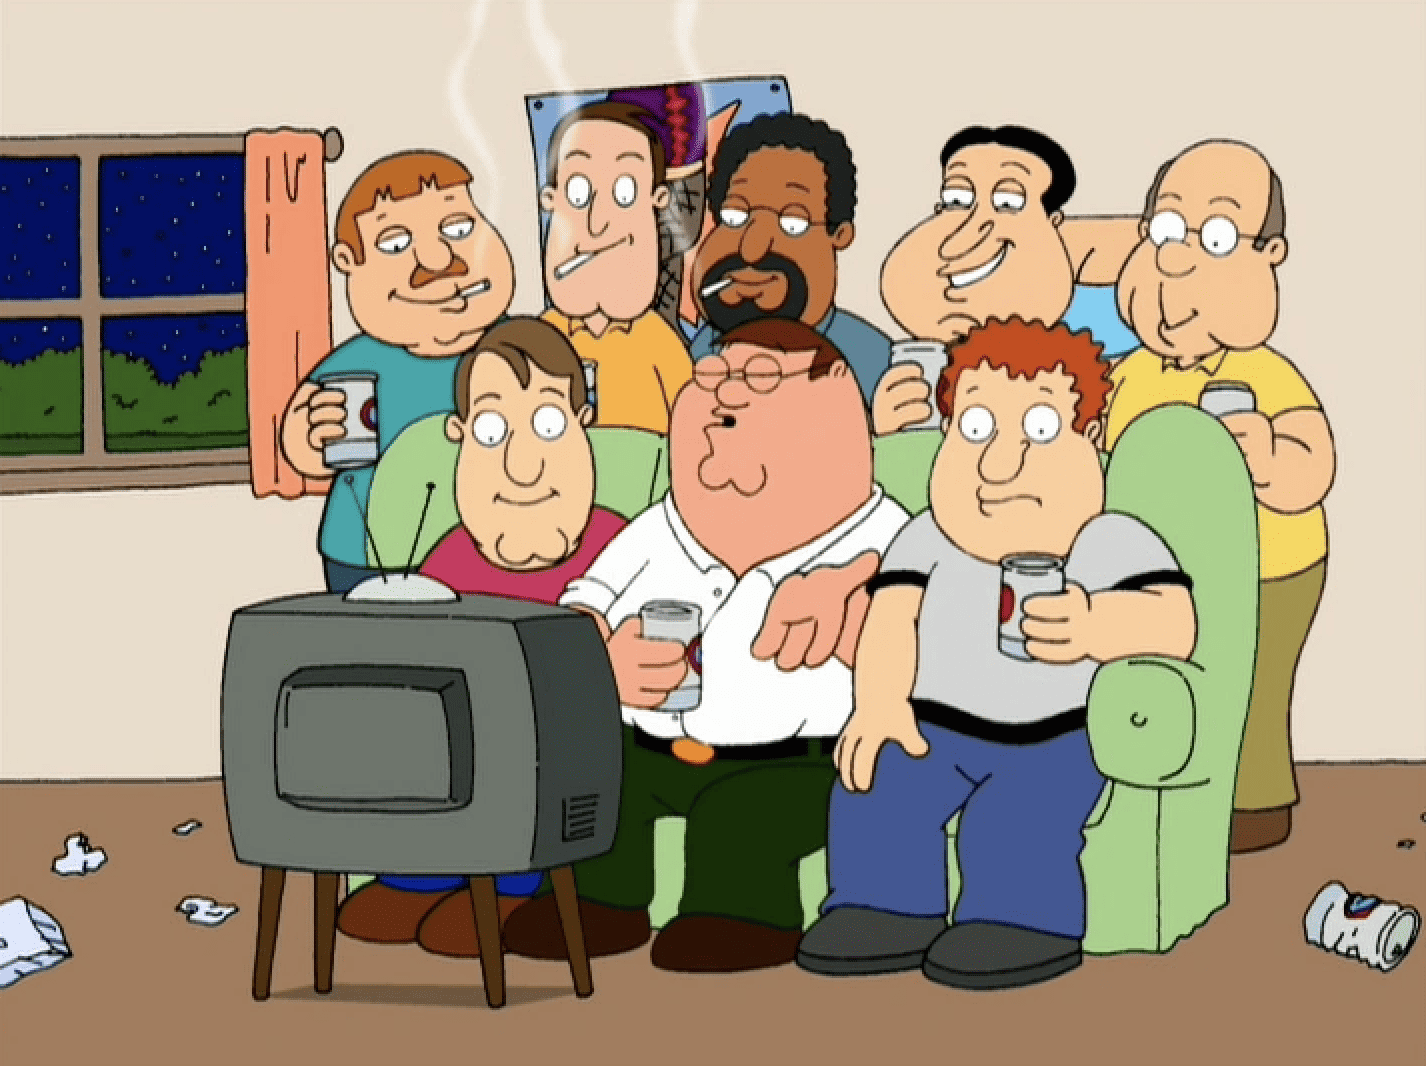 A group of animated men drink beer and watch TV in this image from Fuzzy Door Productions.